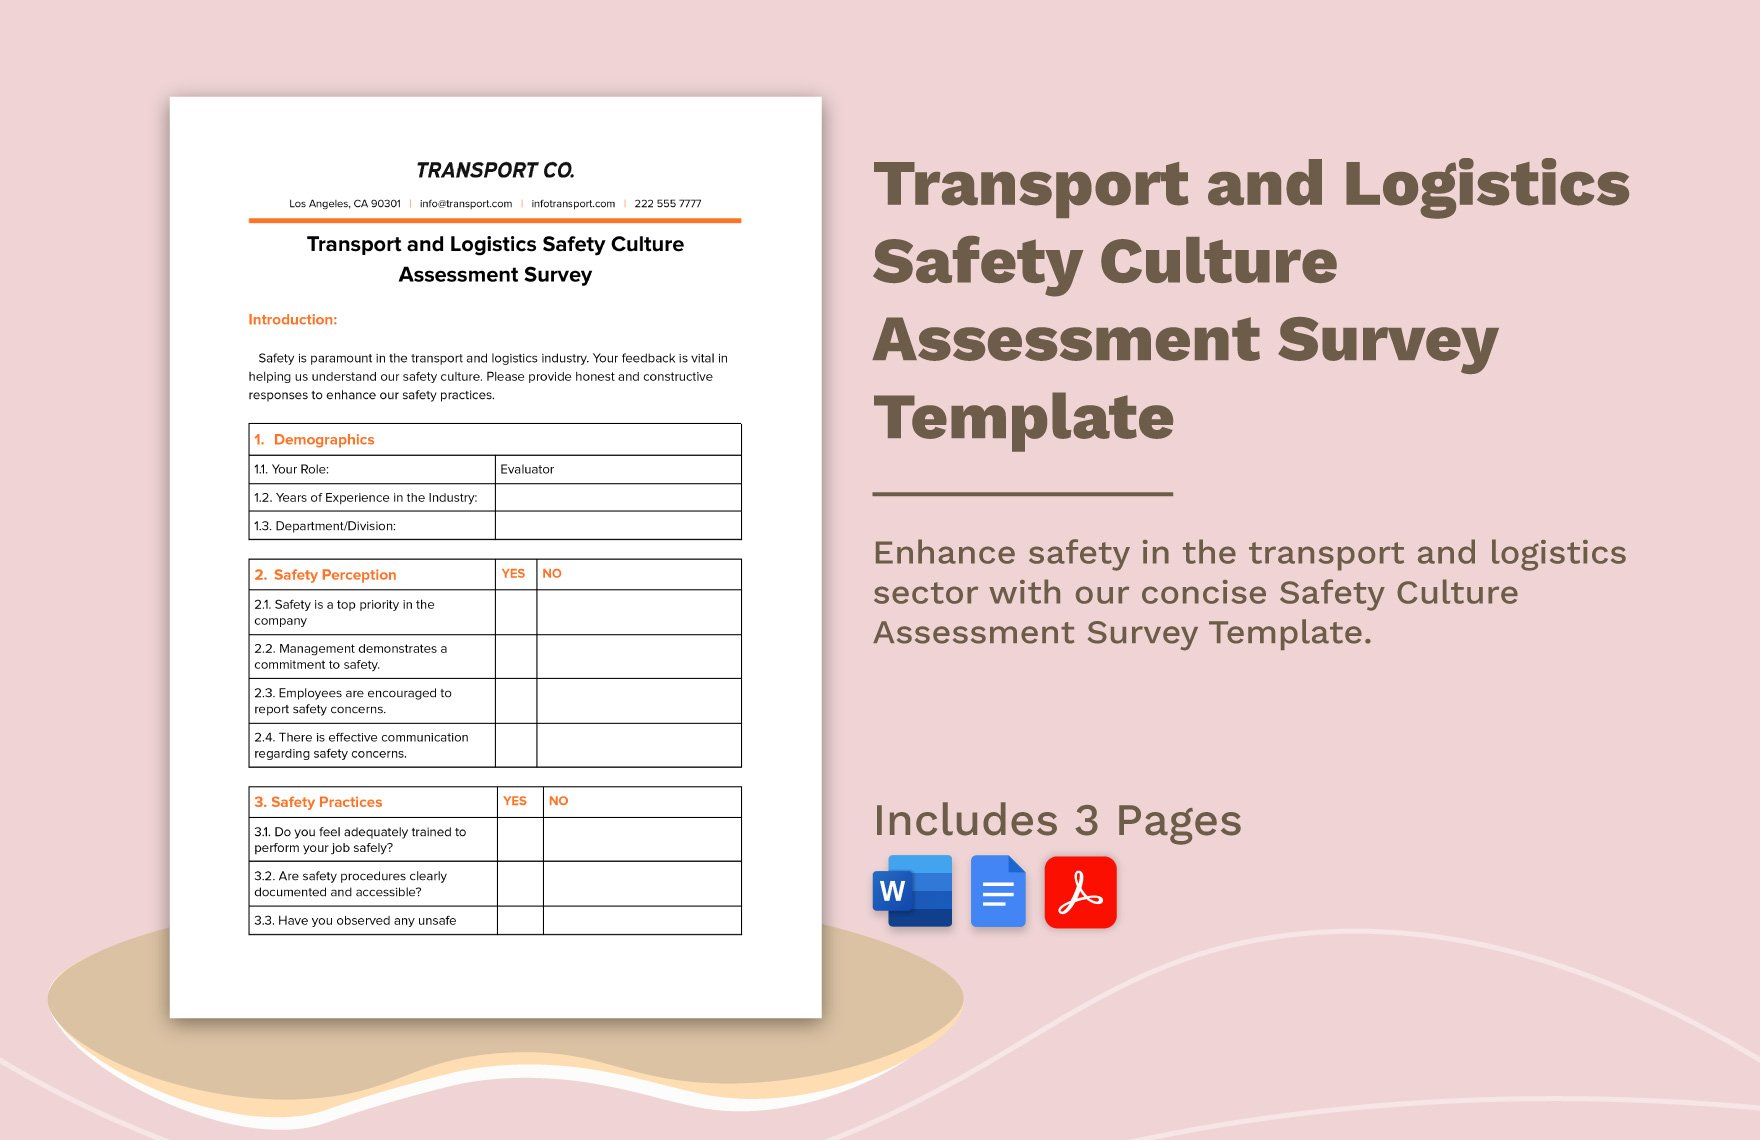 Transport and Logistics Safety Culture Assessment Survey Template